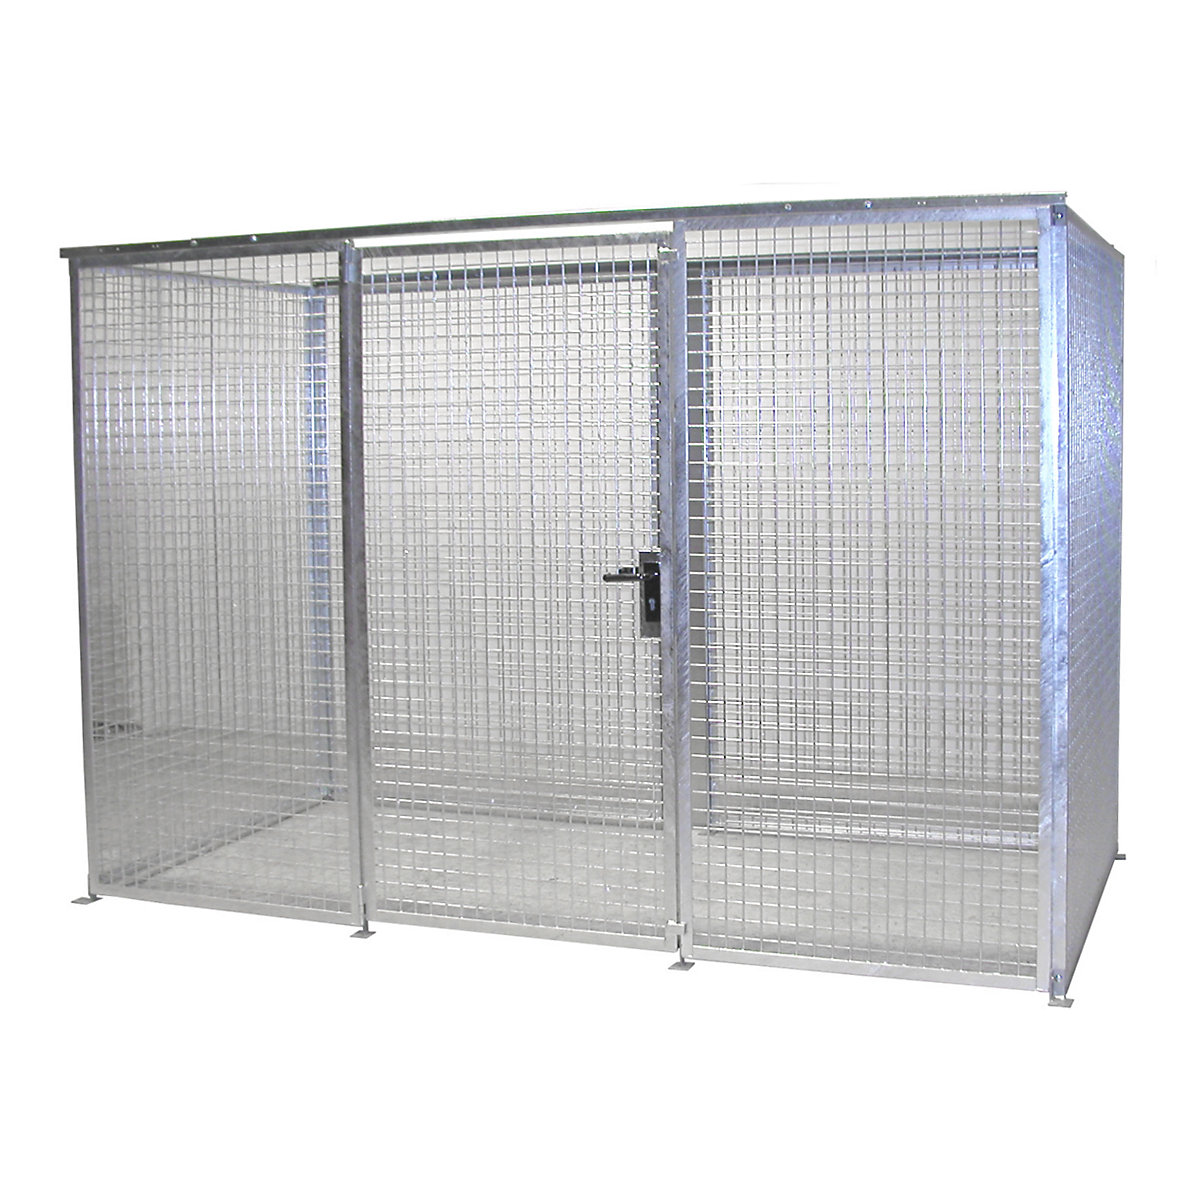 EUROKRAFTpro – Mesh gas cylinder cage, without roof, with single hinged door, WxD 3100 x 1500 mm